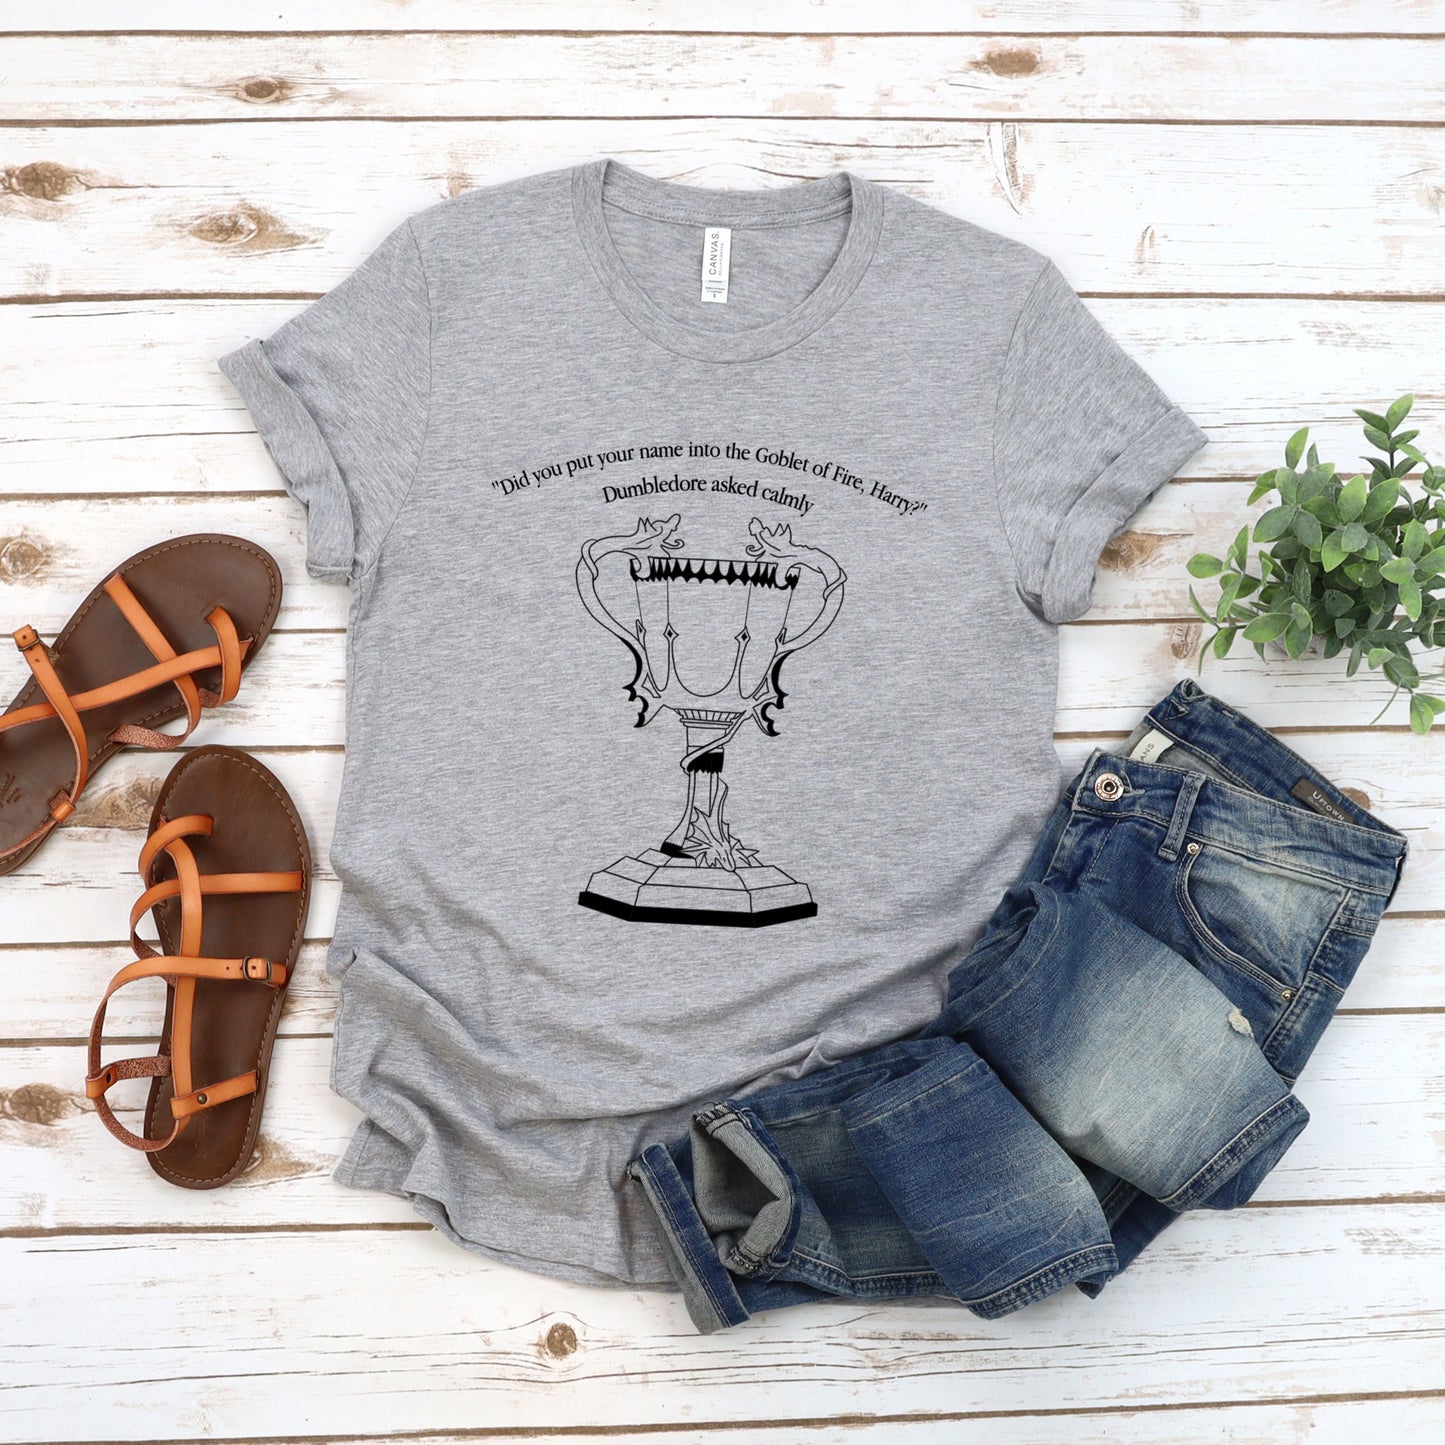 INTO THE GOBLET TEE